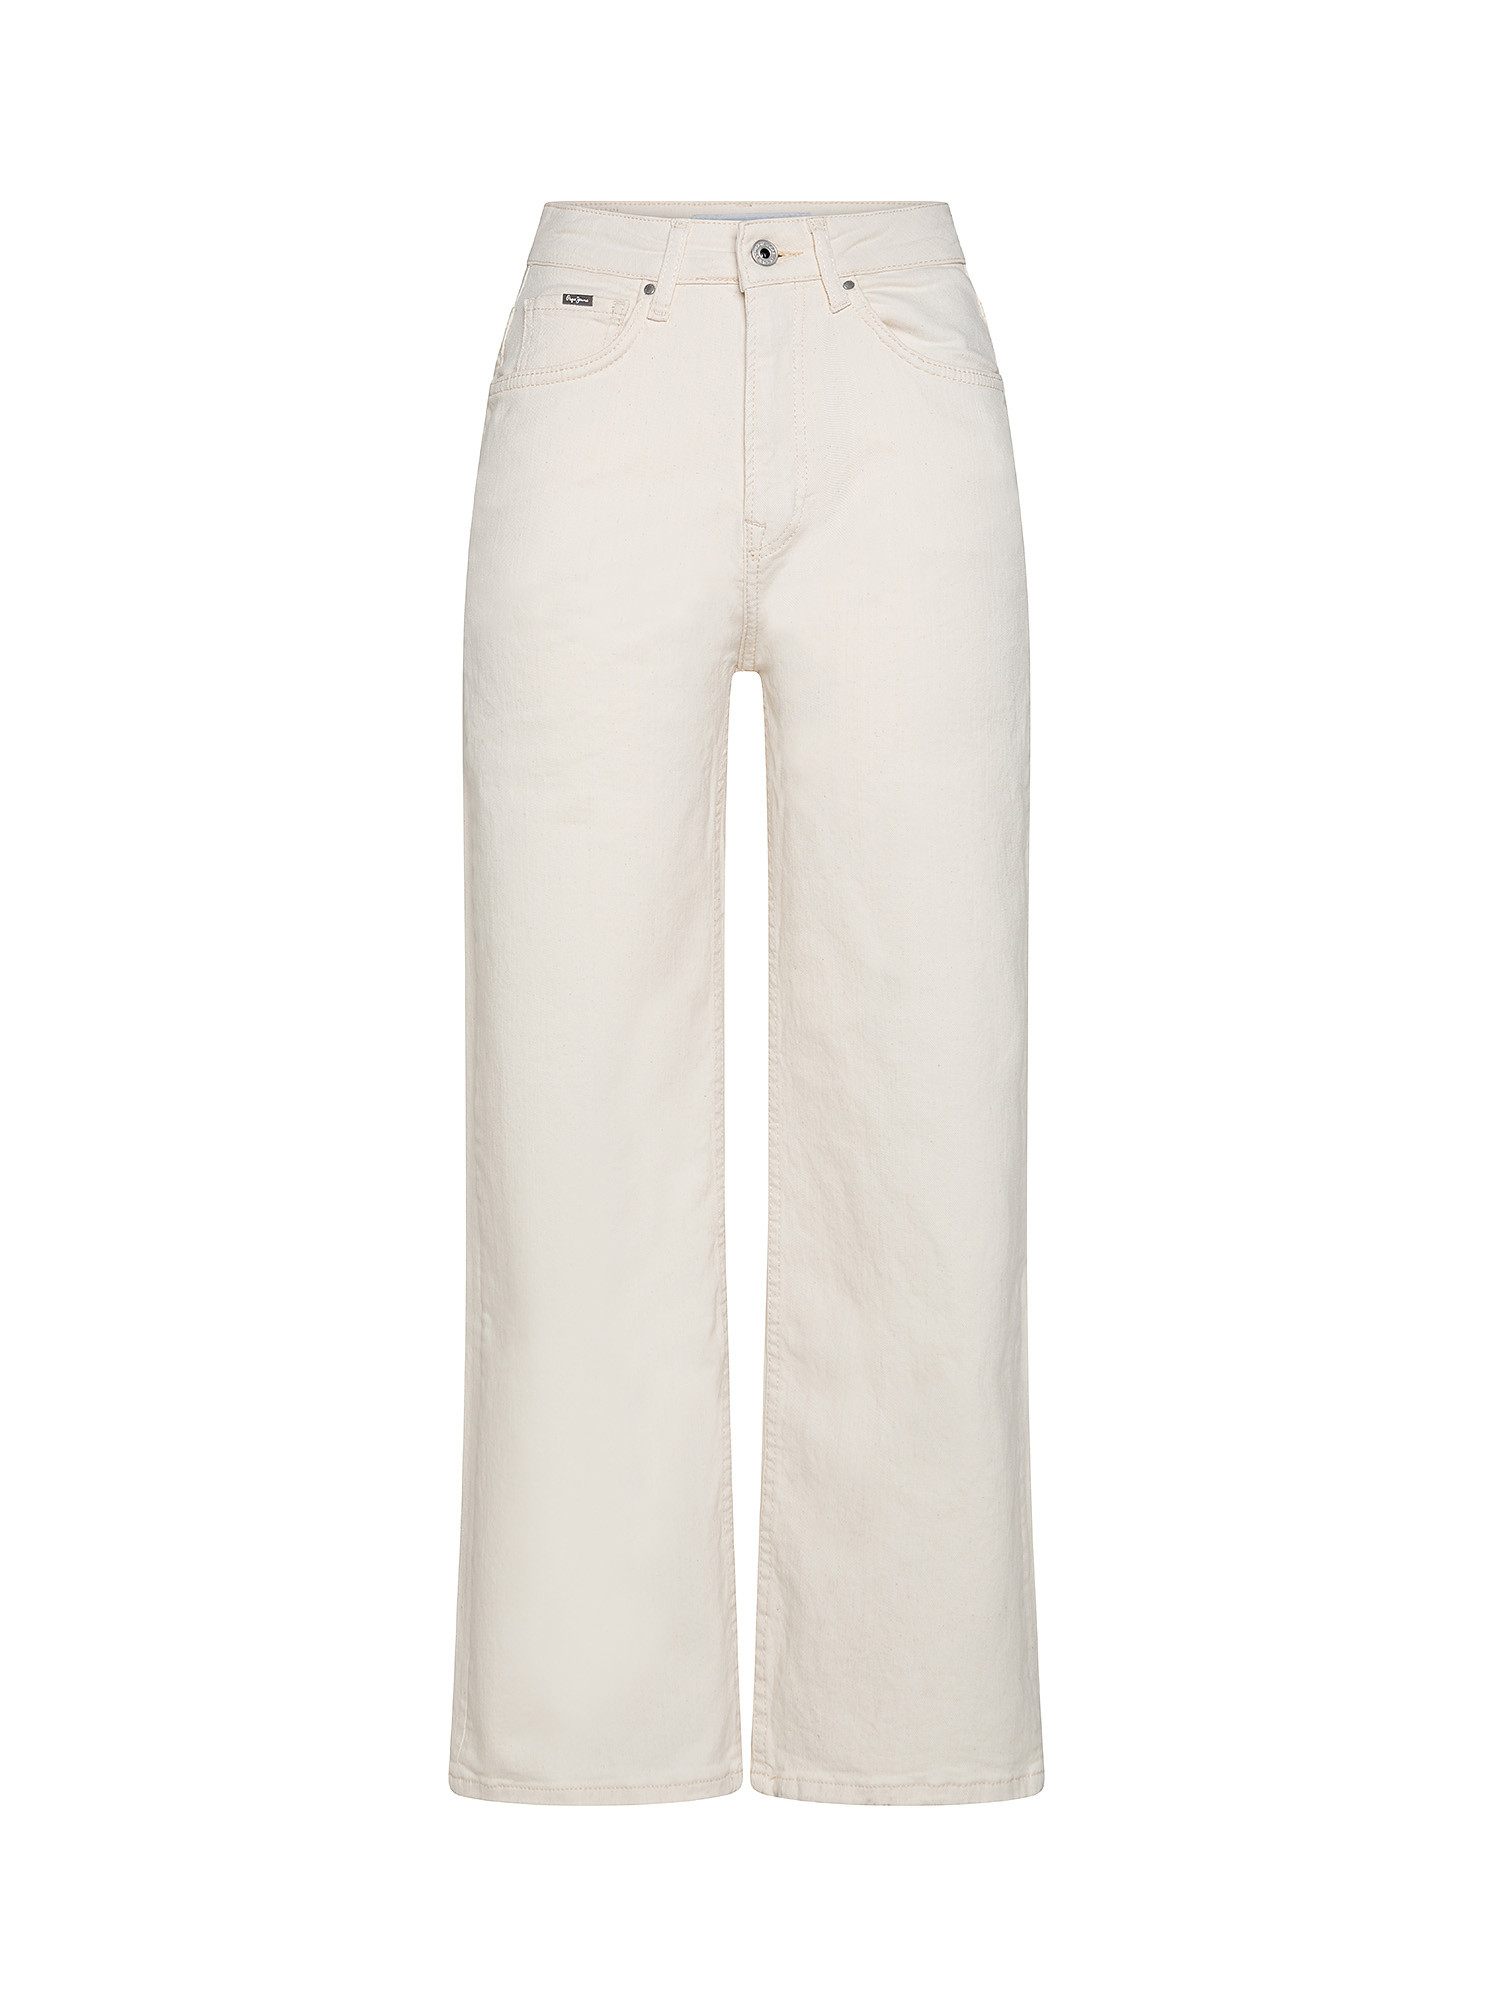 Lexa sky wide fit high waist jeans, White Cream, large image number 0